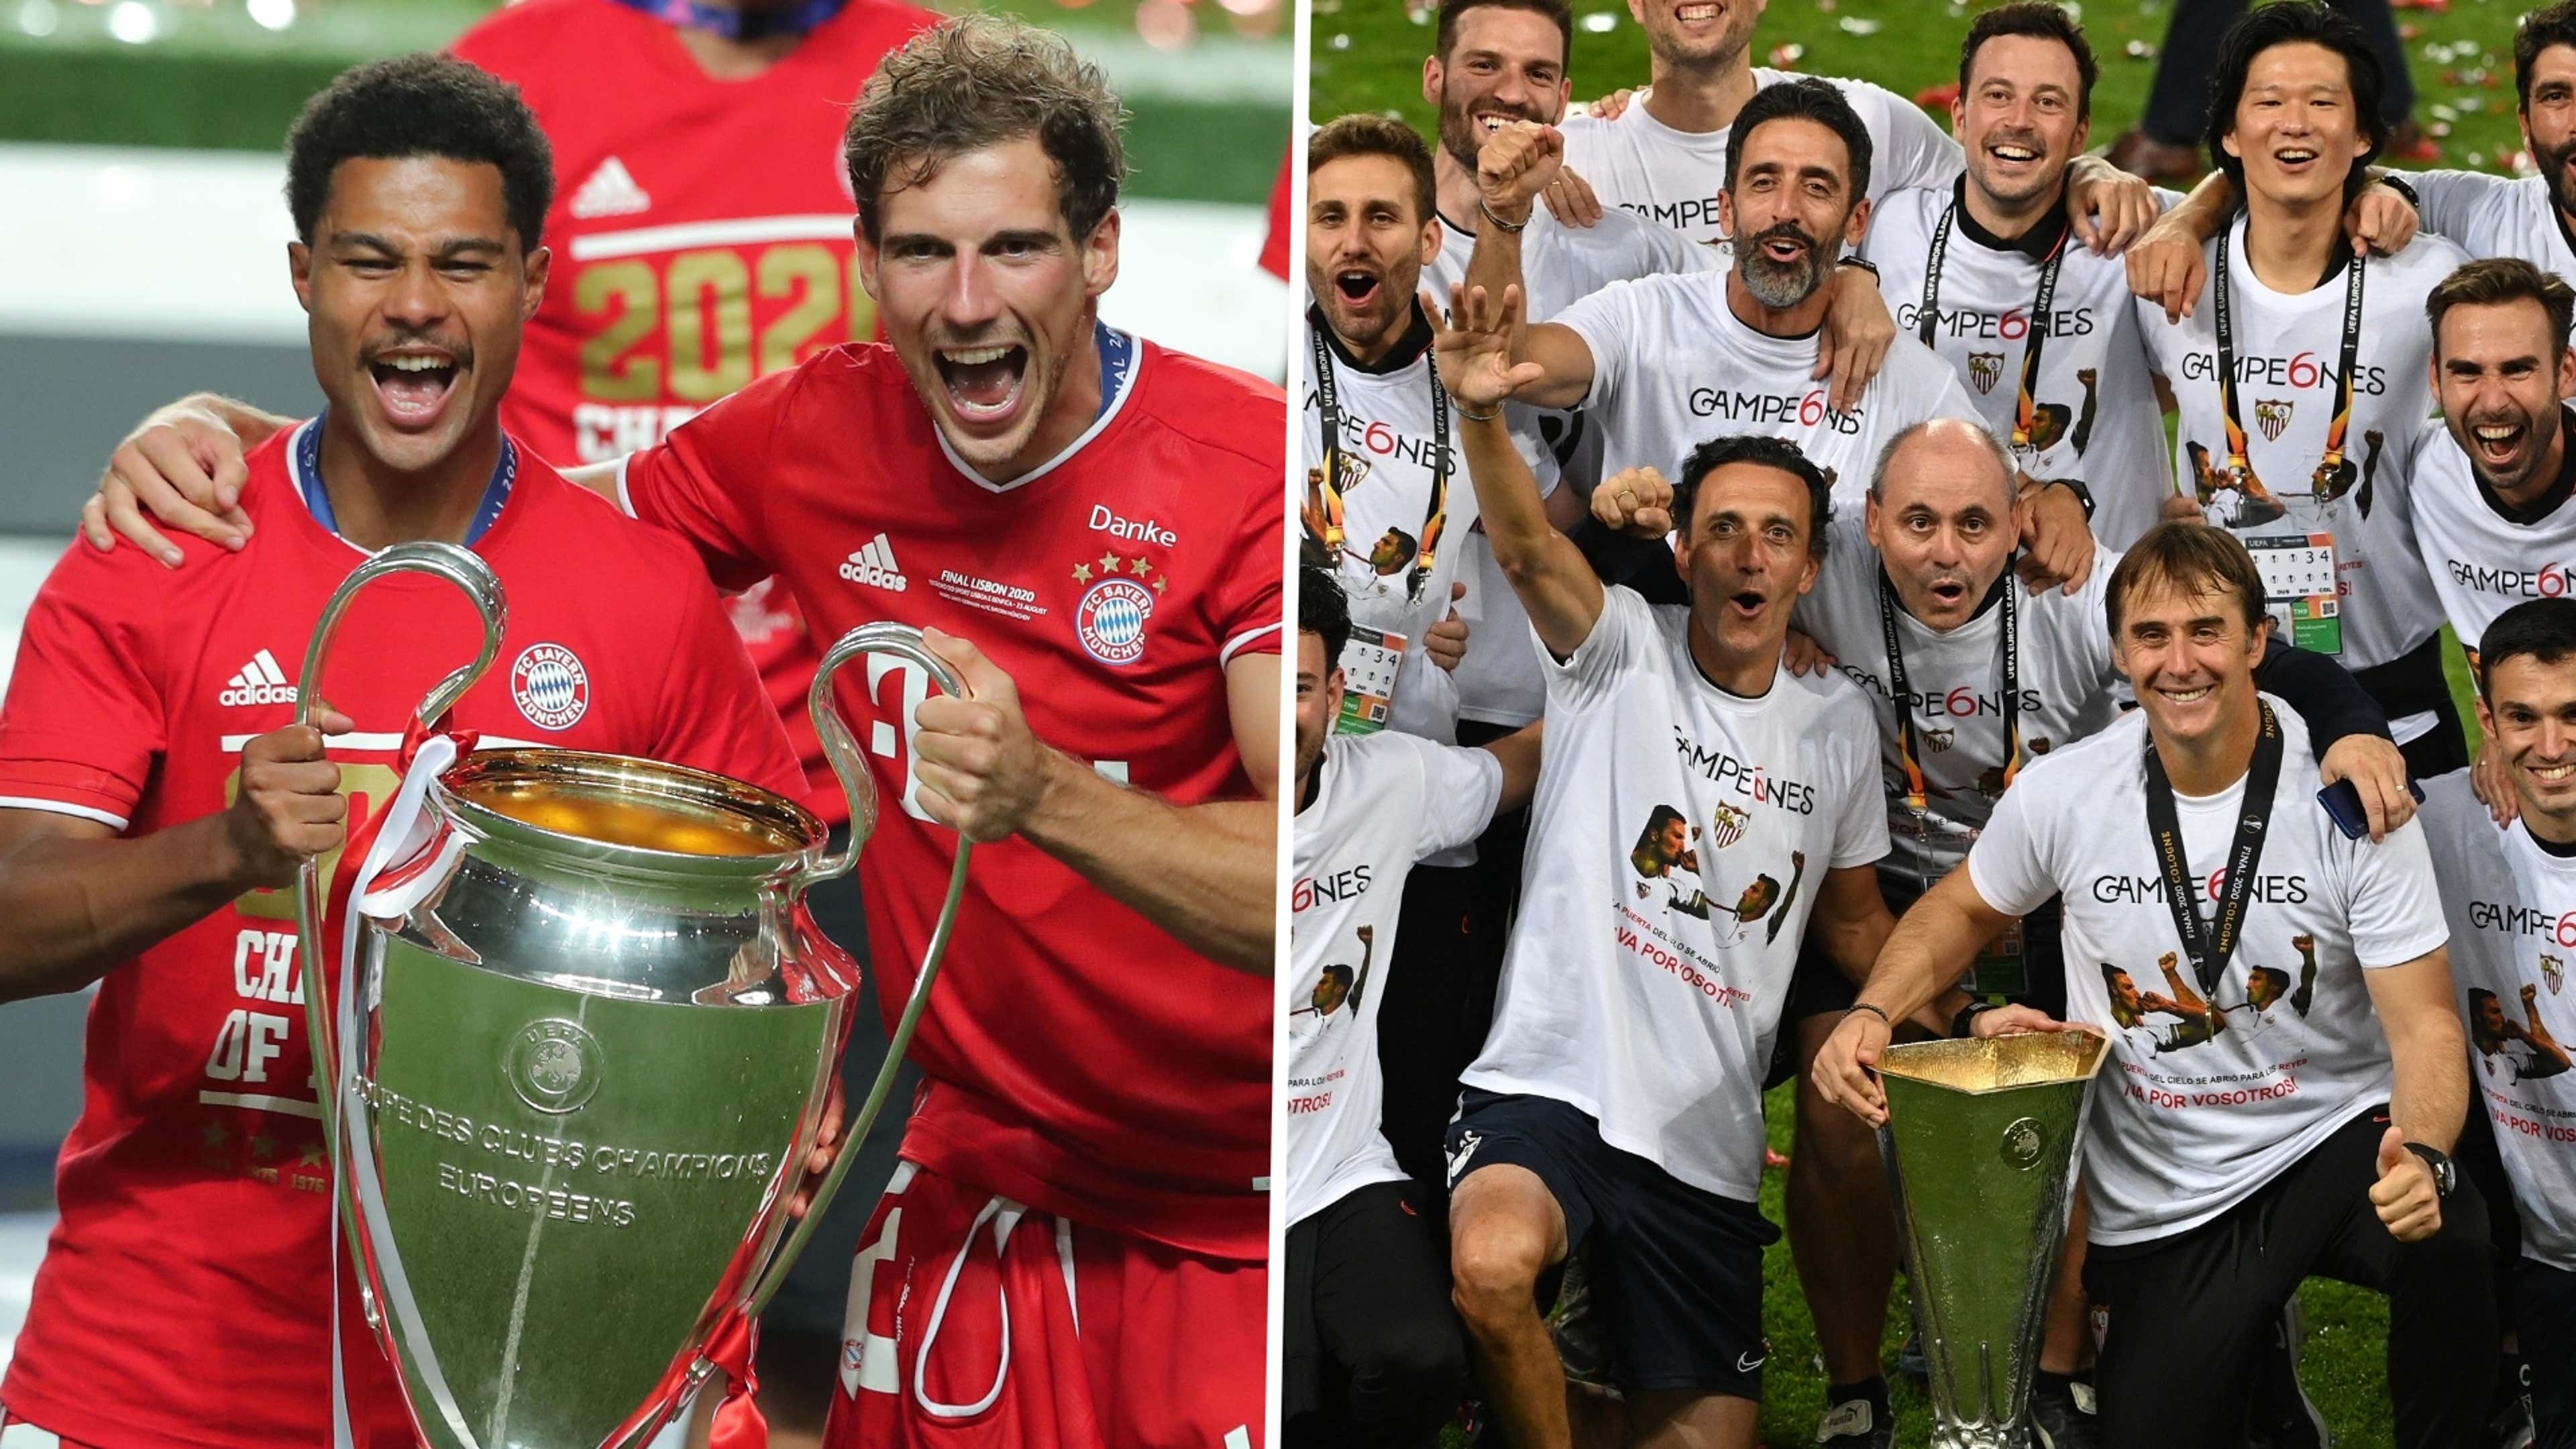 2020 Champions League final: when and where, UEFA Champions League